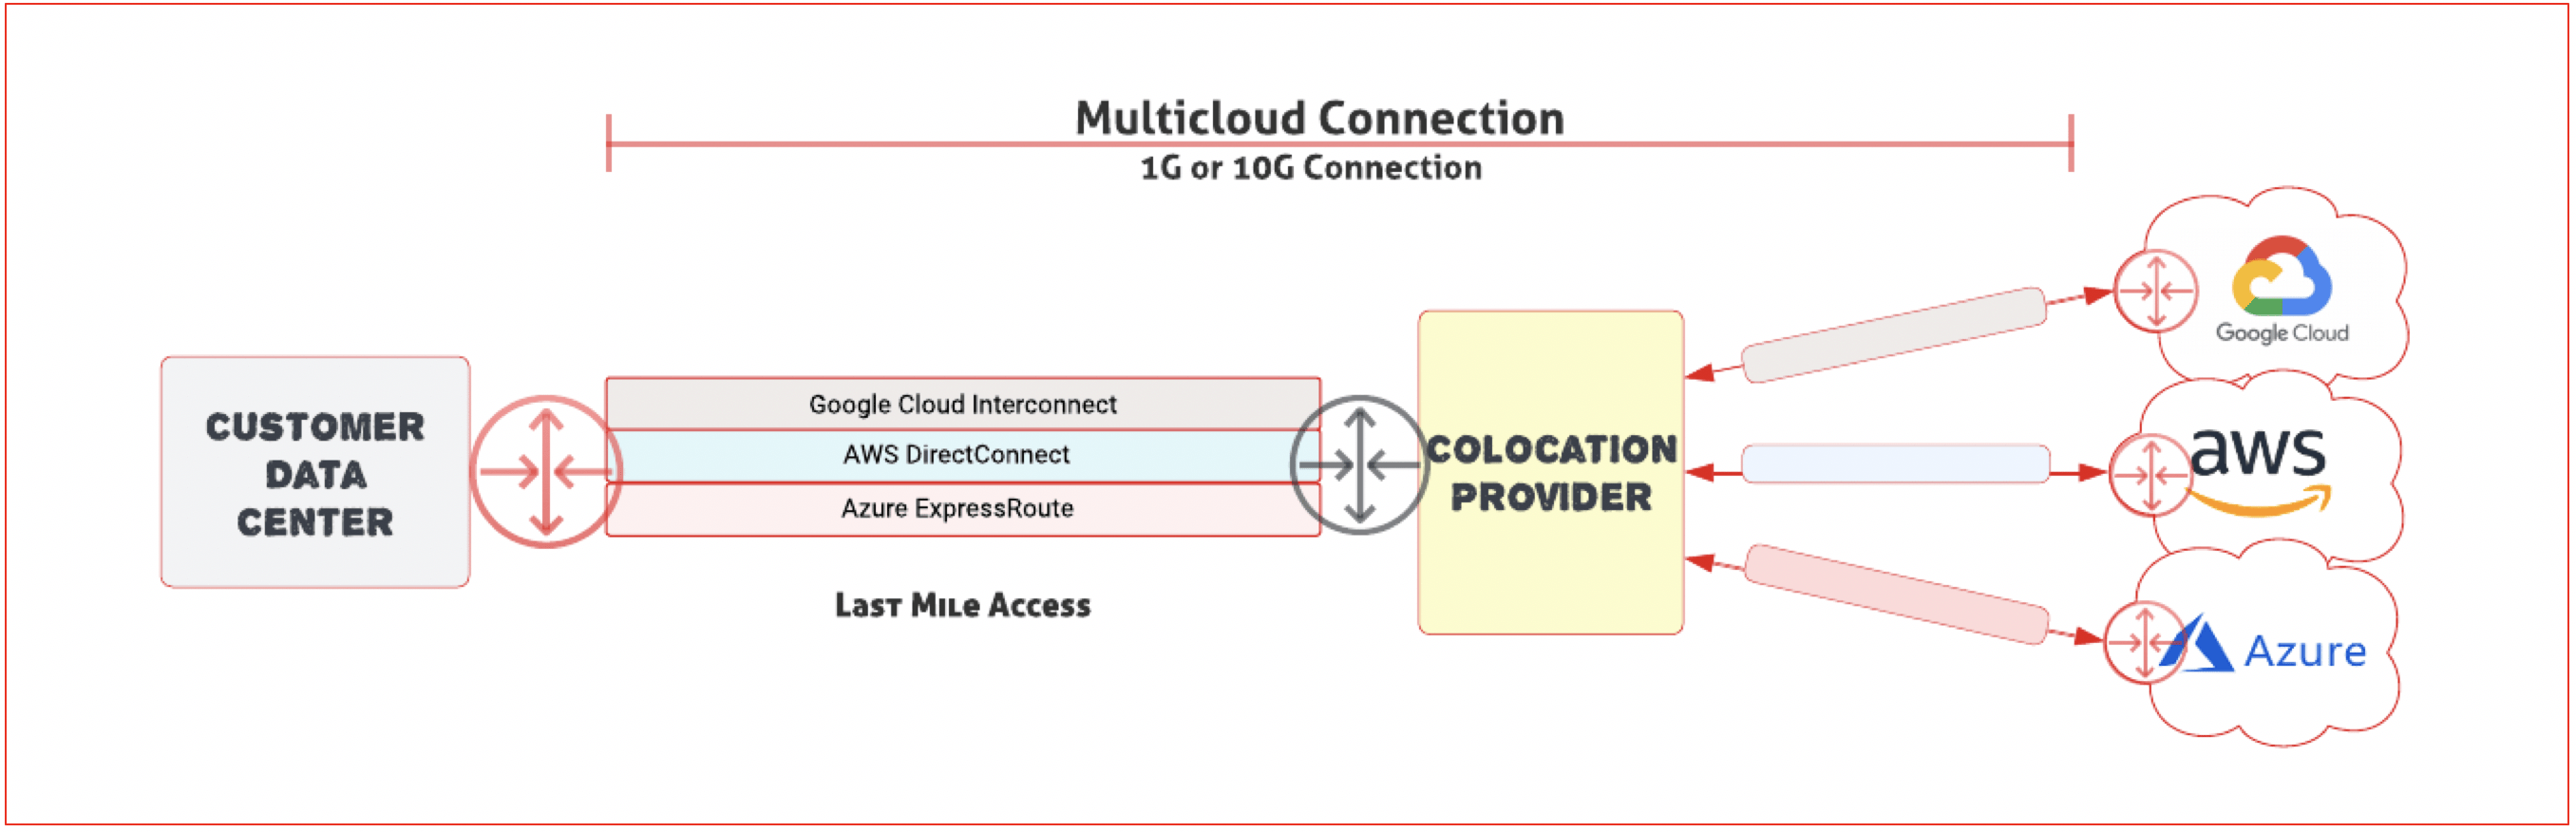 Exhibit C: A DirectConnect or ExpressRoute converted to a Multi-Cloud Access